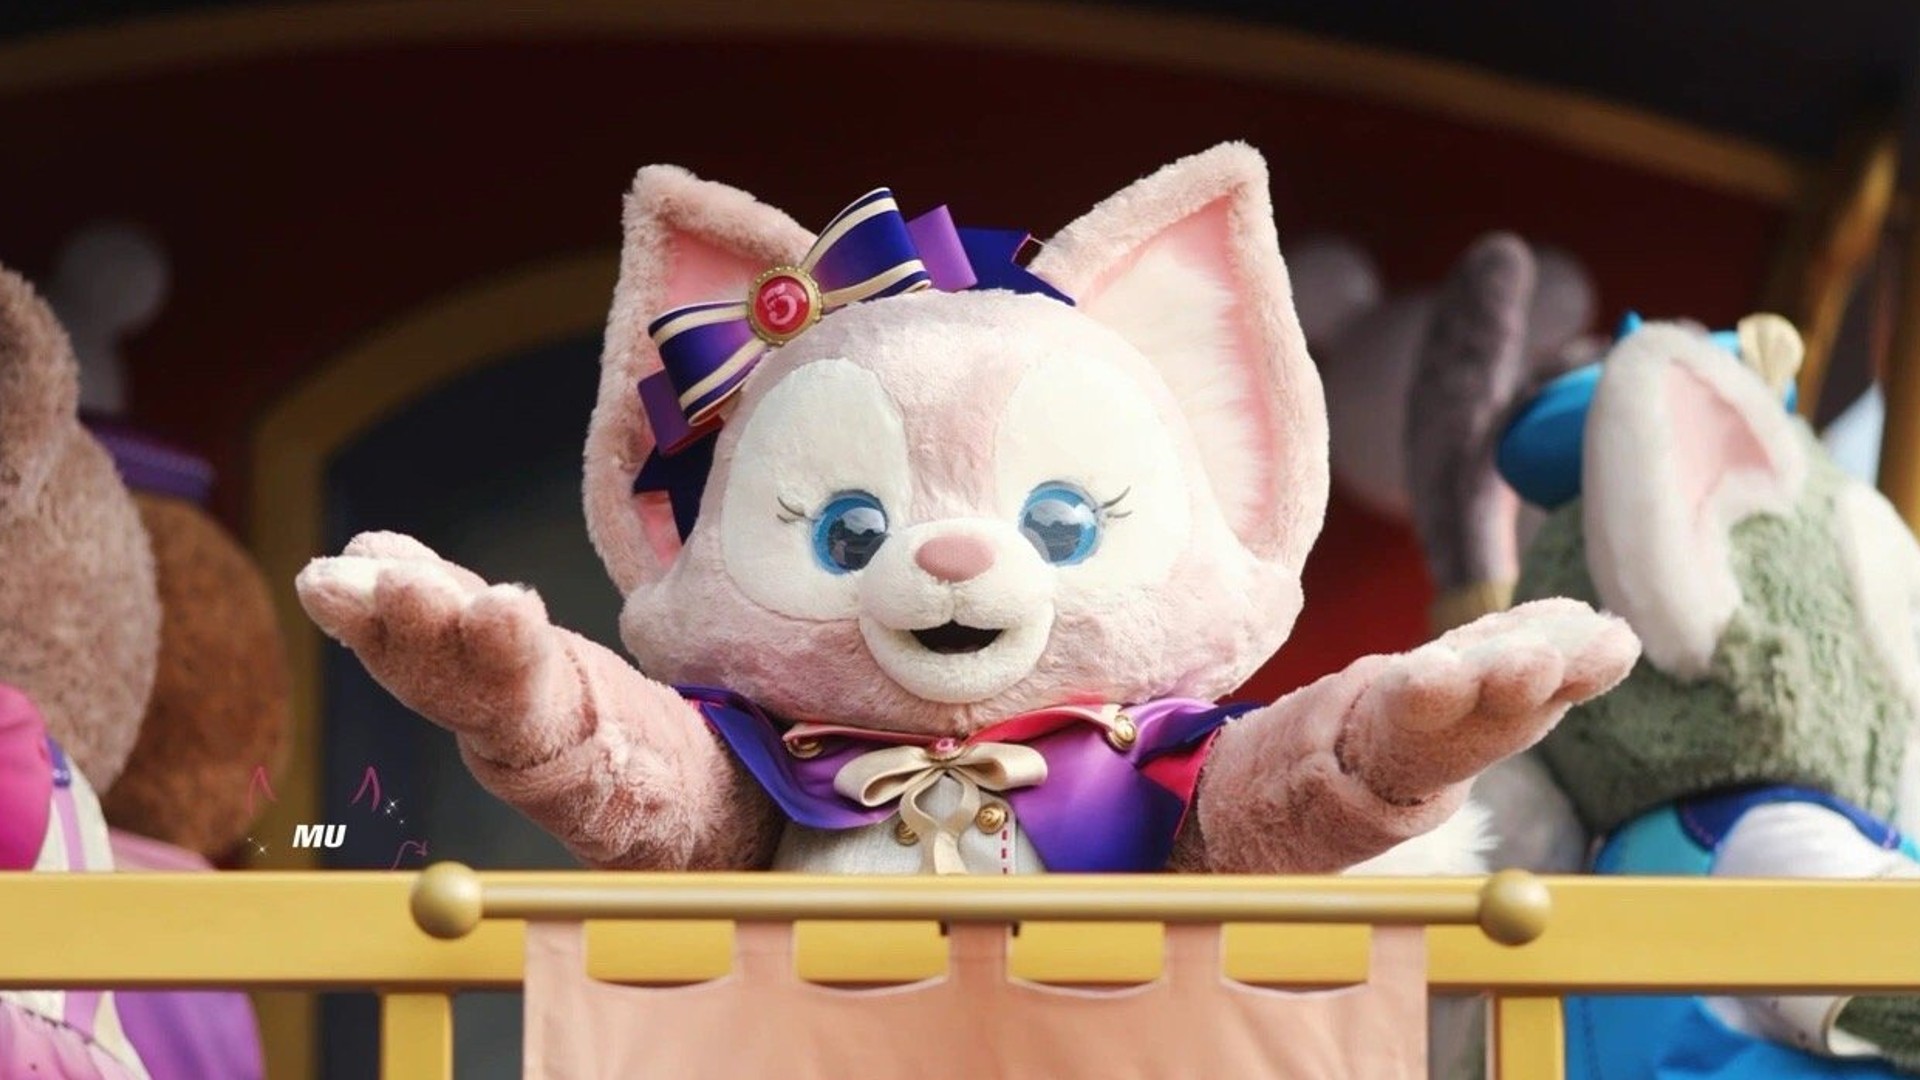 People in China Are Going Wild Over Disney's New Pink Fox Character